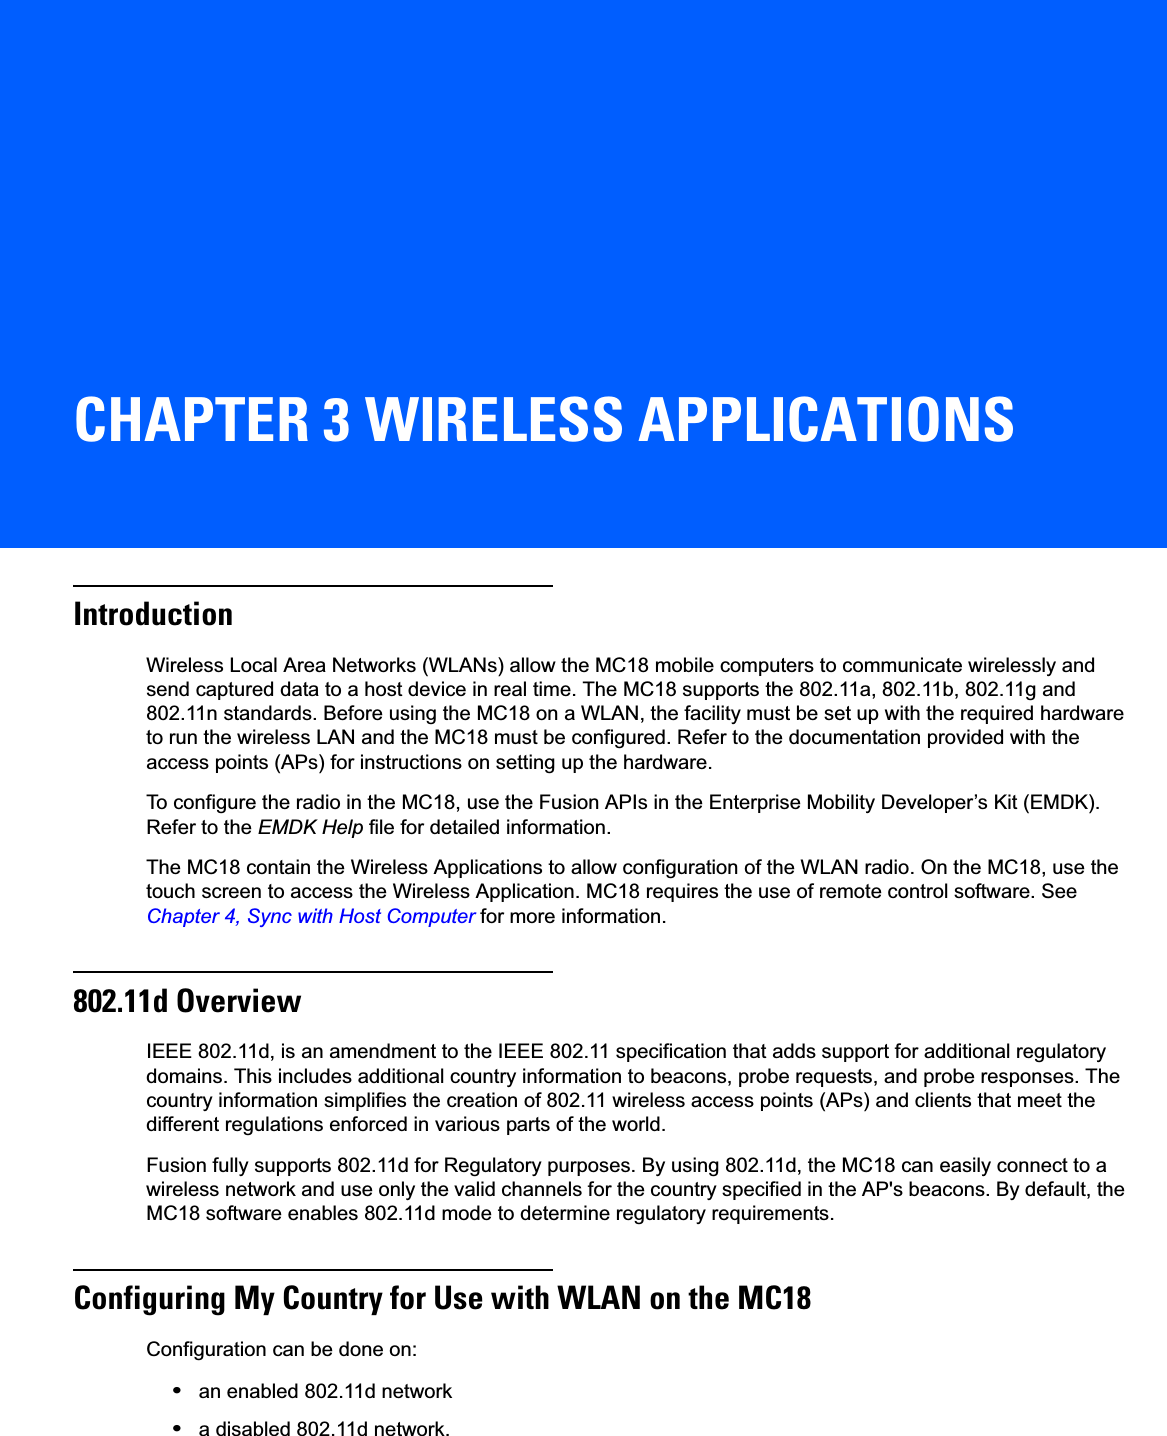 CHAPTER 3 WIRELESS APPLICATIONSIntroductionWireless Local Area Networks (WLANs) allow the MC18 mobile computers to communicate wirelessly and send captured data to a host device in real time. The MC18 supports the 802.11a, 802.11b, 802.11g and 802.11n standards. Before using the MC18 on a WLAN, the facility must be set up with the required hardware to run the wireless LAN and the MC18 must be configured. Refer to the documentation provided with the access points (APs) for instructions on setting up the hardware.To configure the radio in the MC18, use the Fusion APIs in the Enterprise Mobility Developer’s Kit (EMDK). Refer to the EMDK Help file for detailed information.The MC18 contain the Wireless Applications to allow configuration of the WLAN radio. On the MC18, use the touch screen to access the Wireless Application. MC18 requires the use of remote control software. See Chapter 4, Sync with Host Computer for more information.802.11d OverviewIEEE 802.11d, is an amendment to the IEEE 802.11 specification that adds support for additional regulatory domains. This includes additional country information to beacons, probe requests, and probe responses. The country information simplifies the creation of 802.11 wireless access points (APs) and clients that meet the different regulations enforced in various parts of the world.Fusion fully supports 802.11d for Regulatory purposes. By using 802.11d, the MC18 can easily connect to a wireless network and use only the valid channels for the country specified in the AP&apos;s beacons. By default, the MC18 software enables 802.11d mode to determine regulatory requirements.Configuring My Country for Use with WLAN on the MC18Configuration can be done on:•an enabled 802.11d network•a disabled 802.11d network.